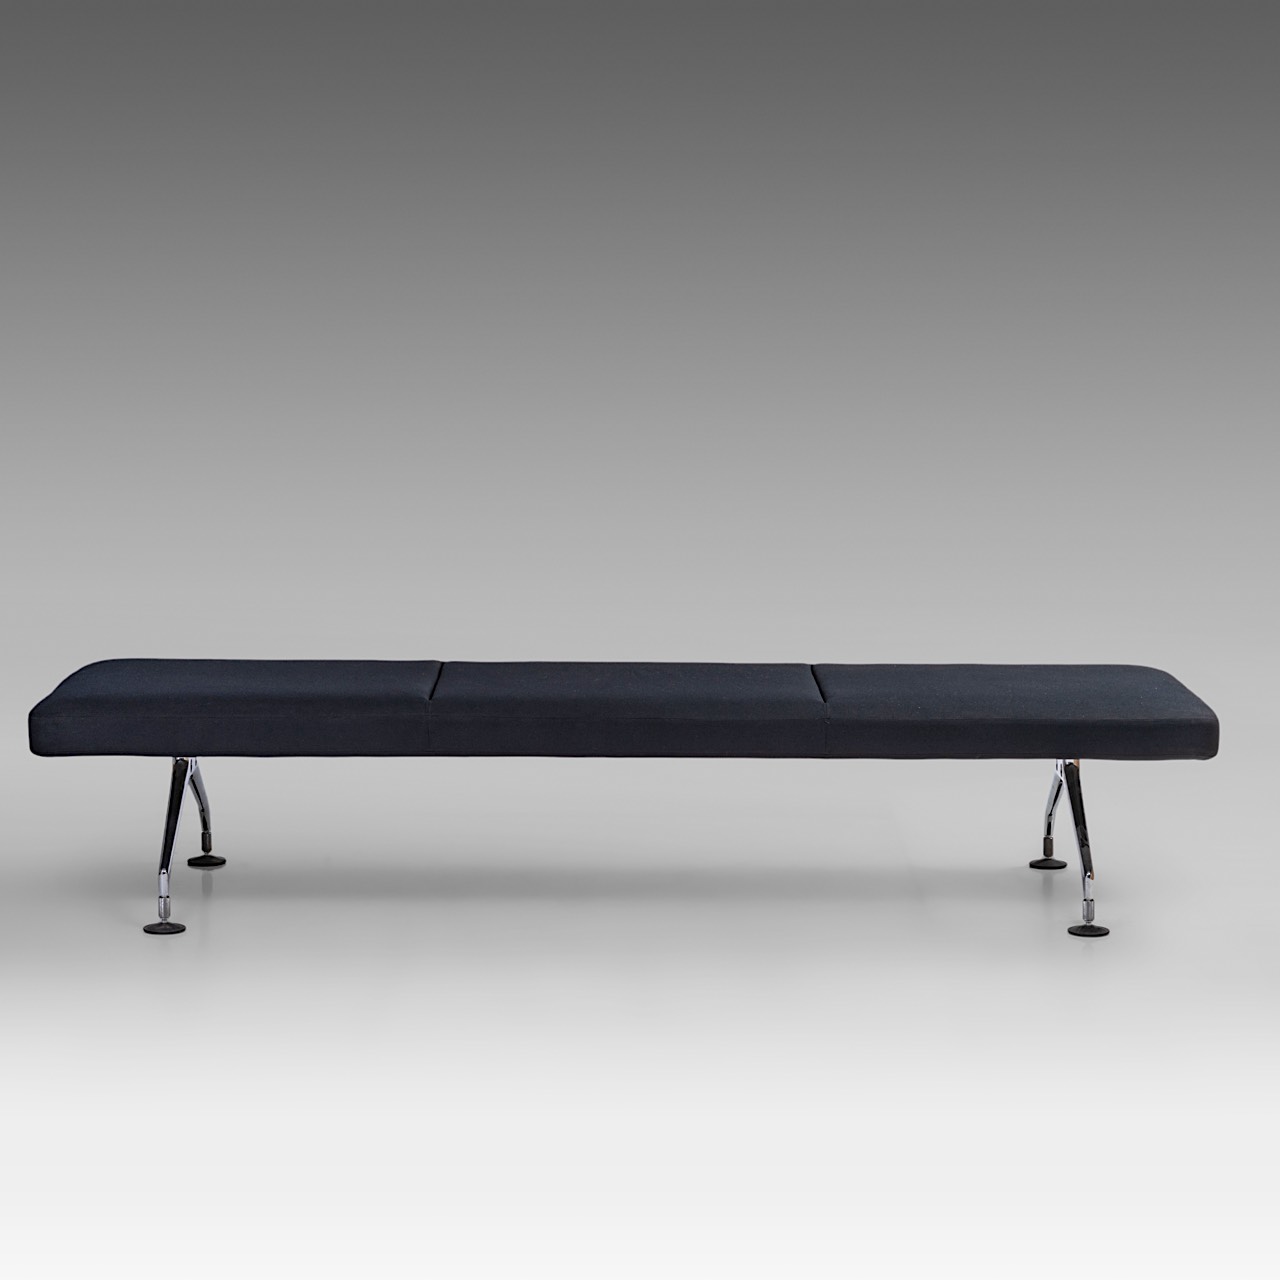 A pair of Antonio Citterio daybeds for Vitra, H 42 - W 222 - D 68 cm - Image 5 of 8